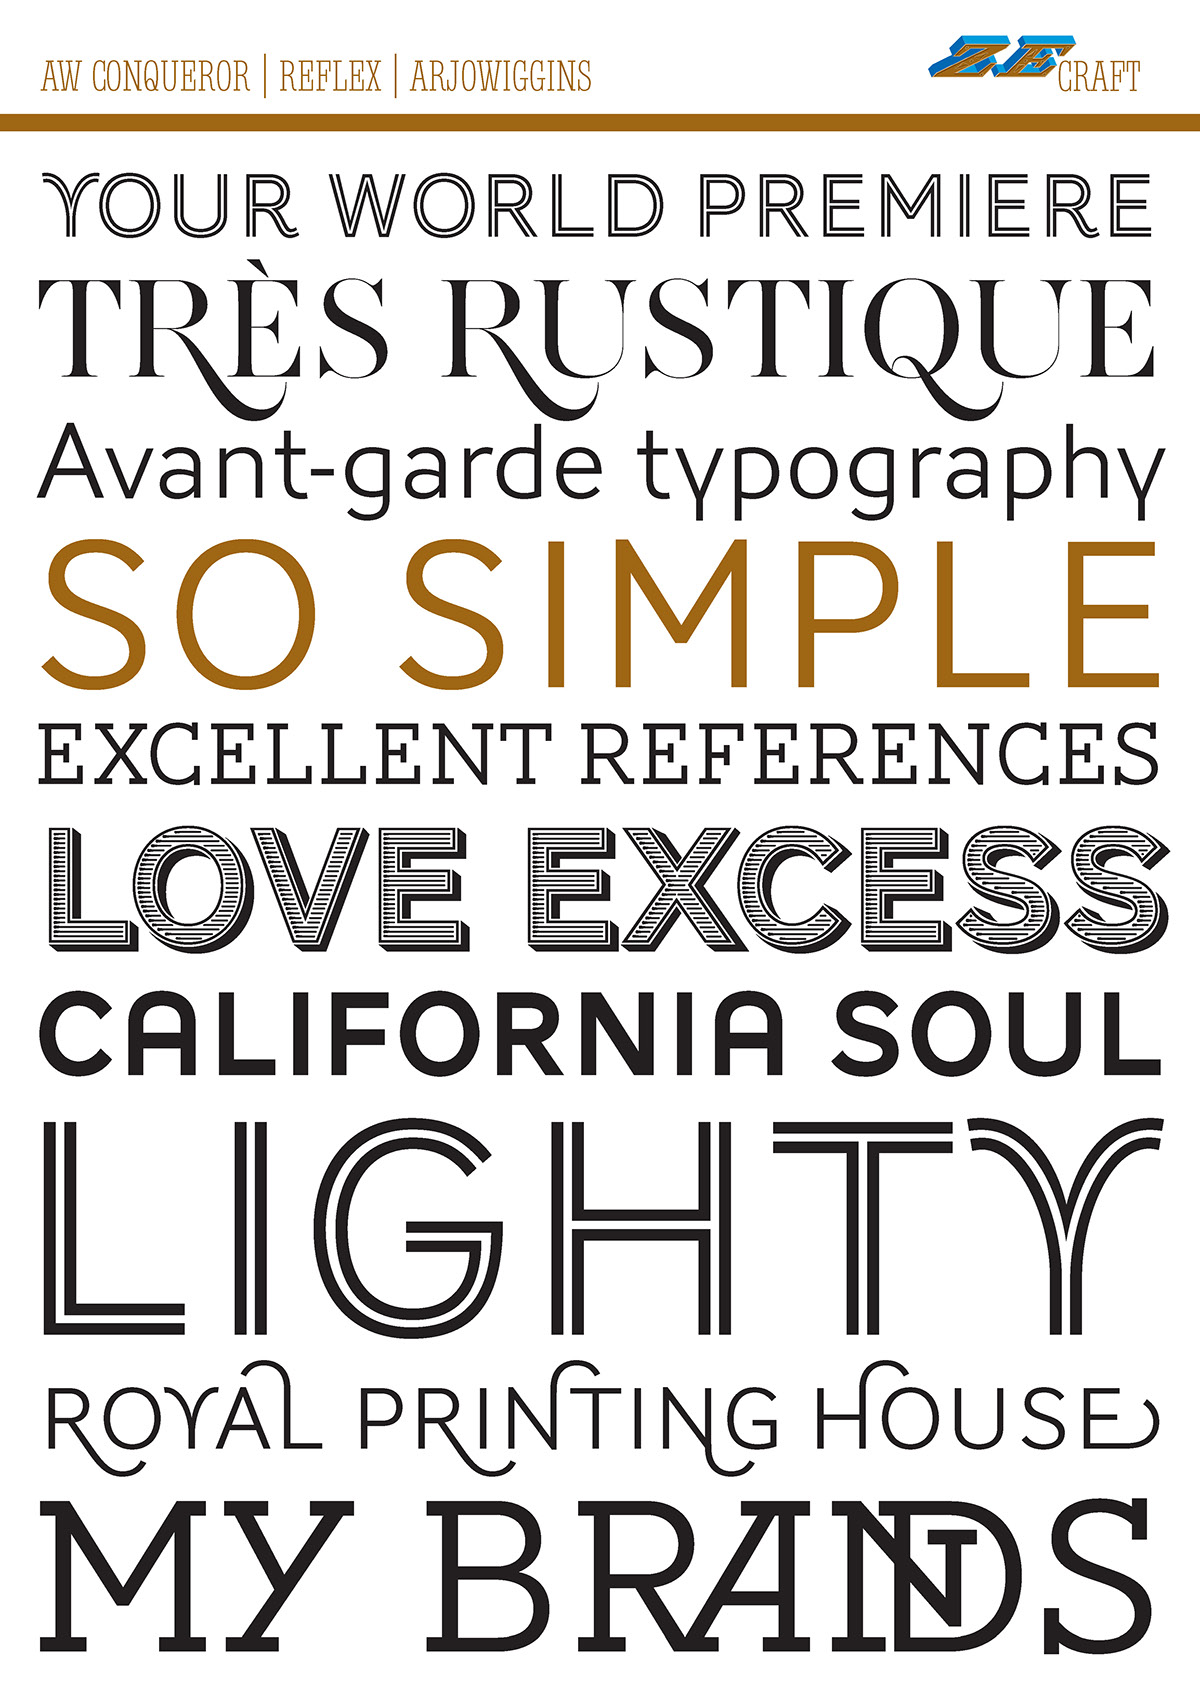 Arjowiggins Typofonderie Conqueror AW ATypI TypeCon paper fonts free